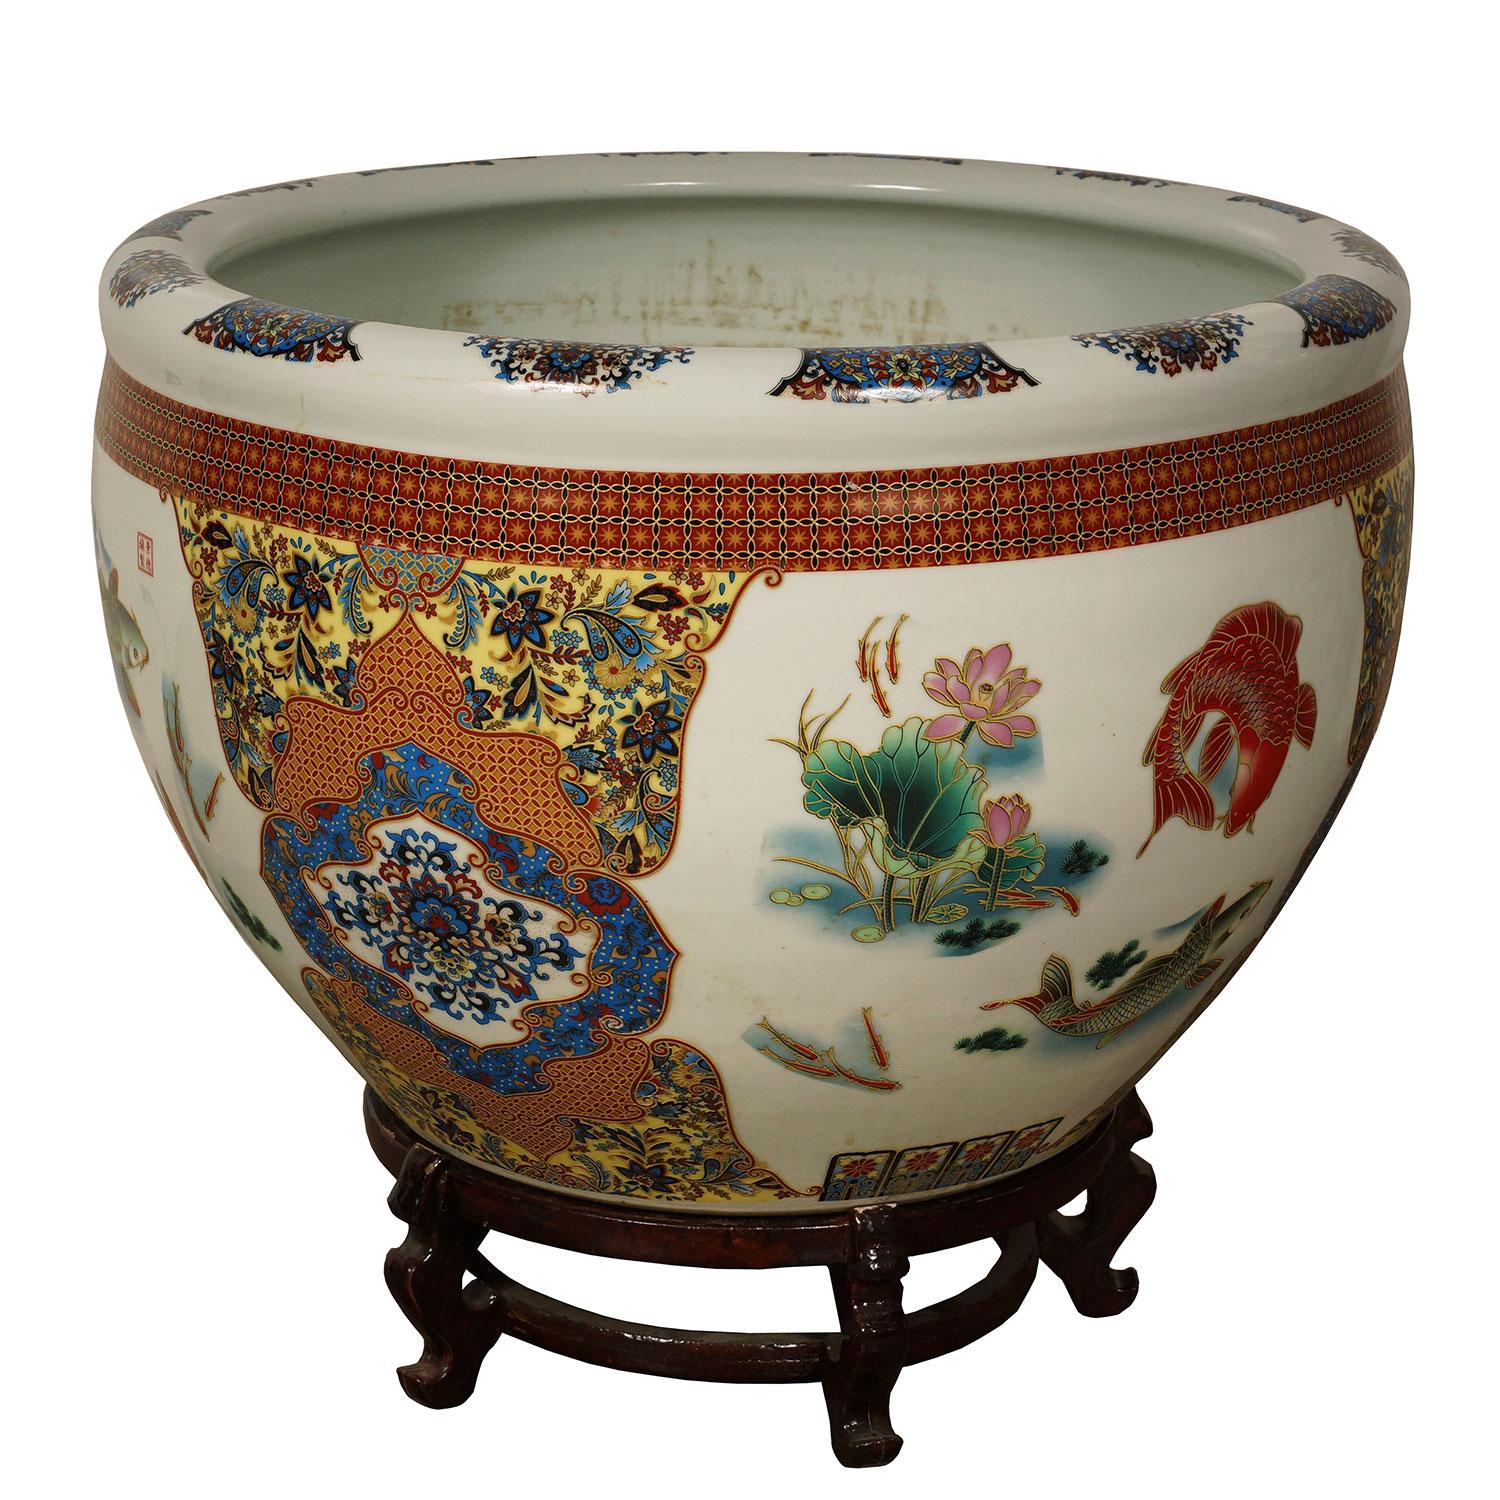 Early 20th Century Antique Chinese Famille Rose Porcelain Fish Bowl, Planter In Good Condition For Sale In Pomona, CA